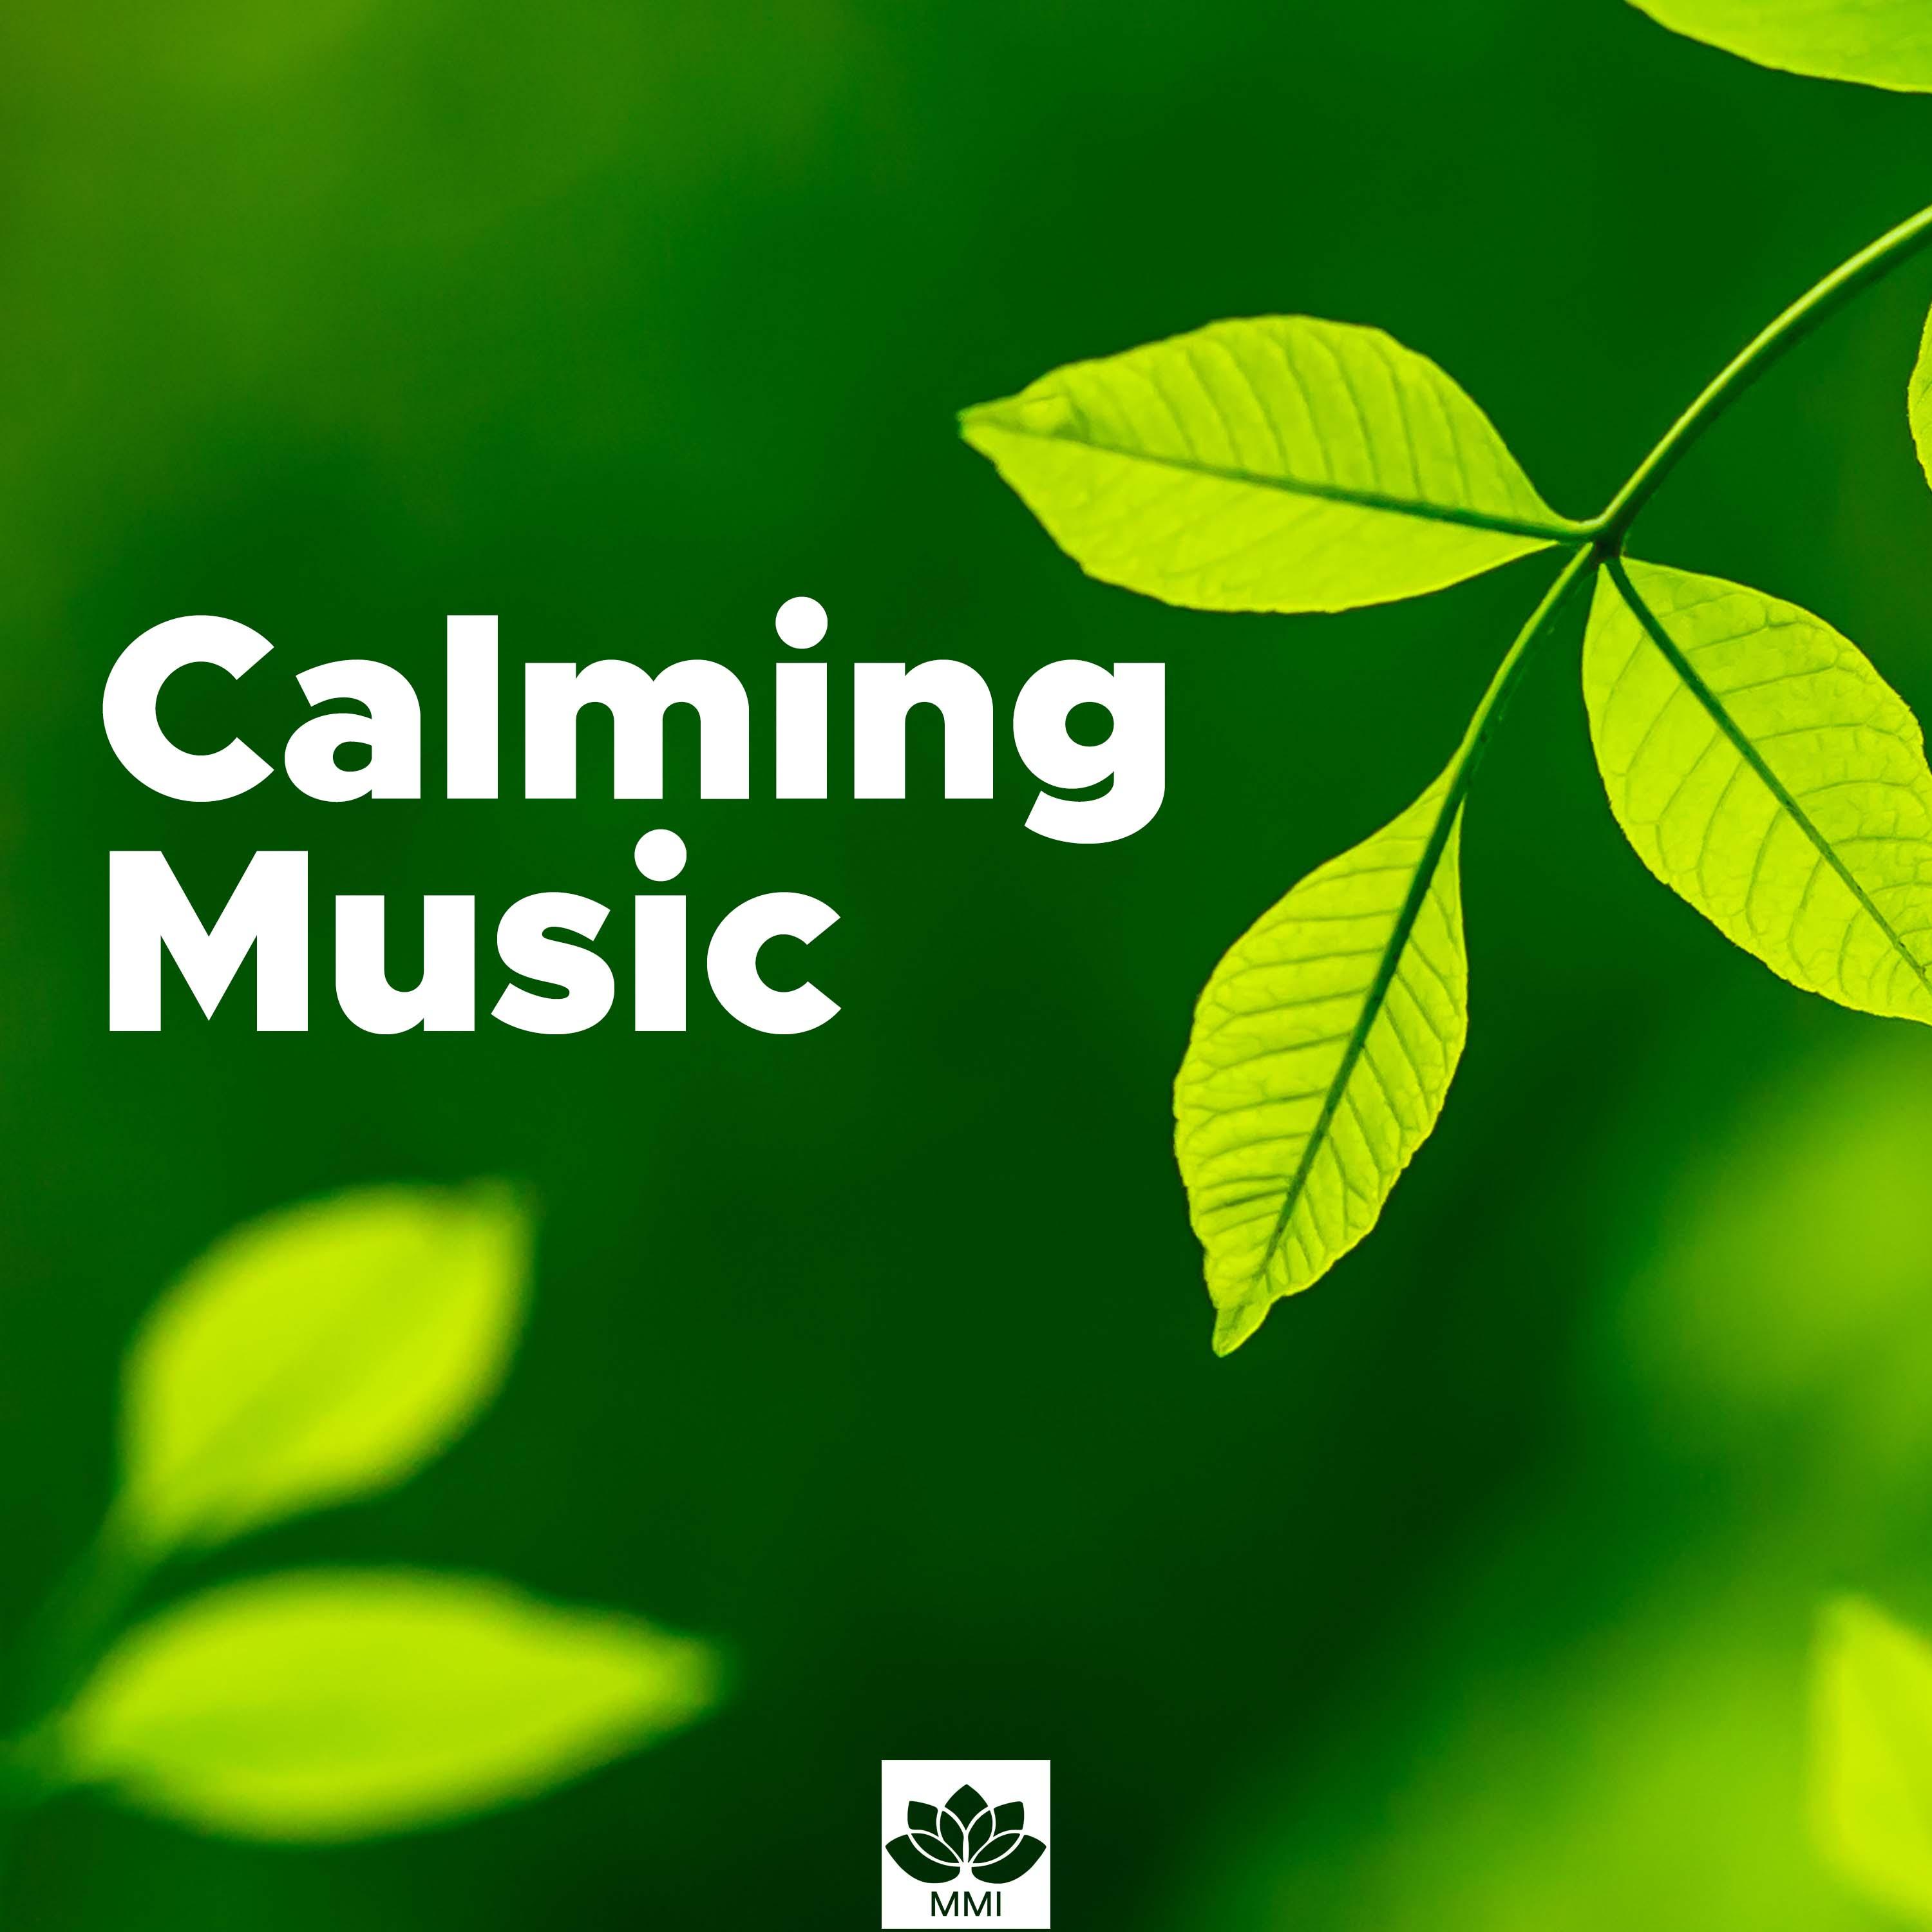 Calming Music - Relaxing Instrumental Music to Relieve Stress, Negative Thoughts and Anger